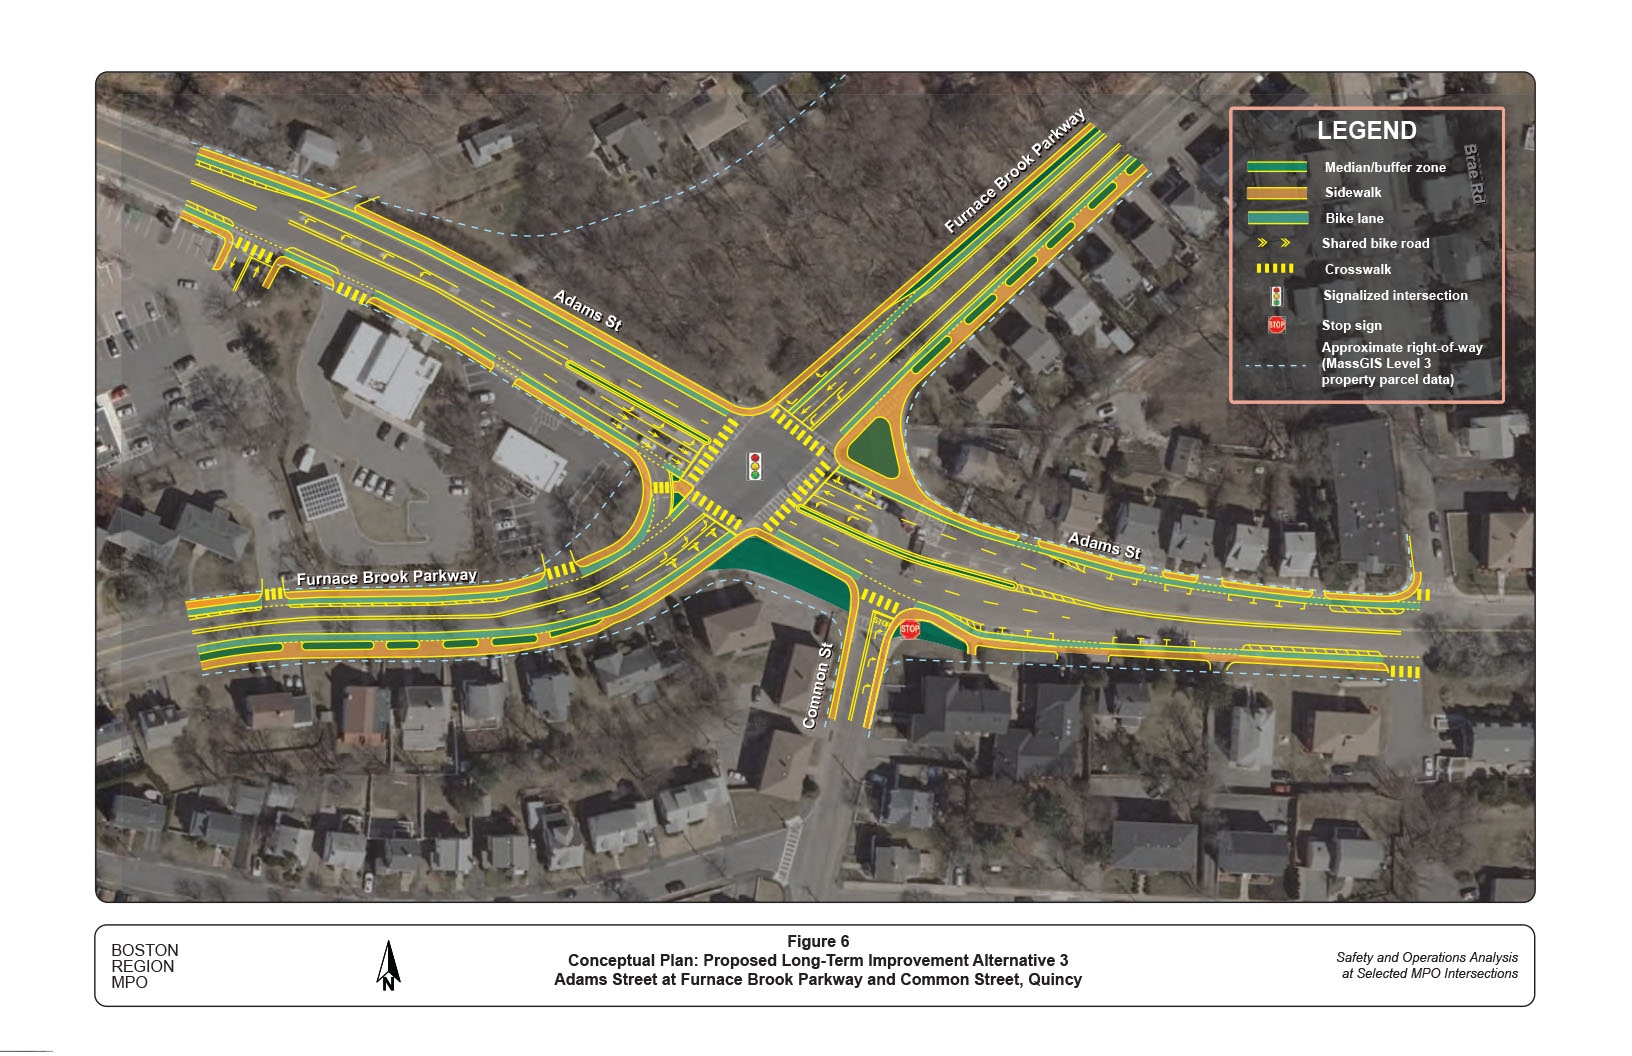 Figure 6: Proposed Long-Term Improvement Alternative 3
This figure shows a conceptual plan view of the proposed roadway modifications in the long-term improvement Alternative 3.
